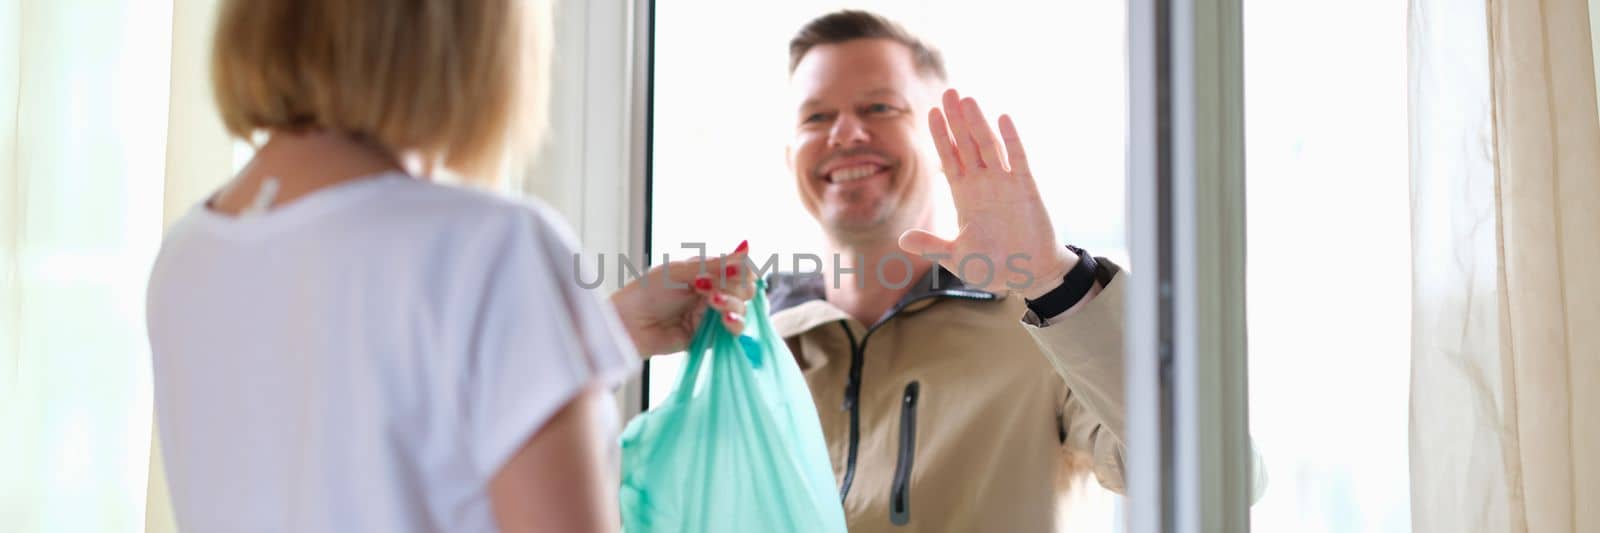 Male courier brought a package with groceries and delivery of goods. Parcel delivery service concept